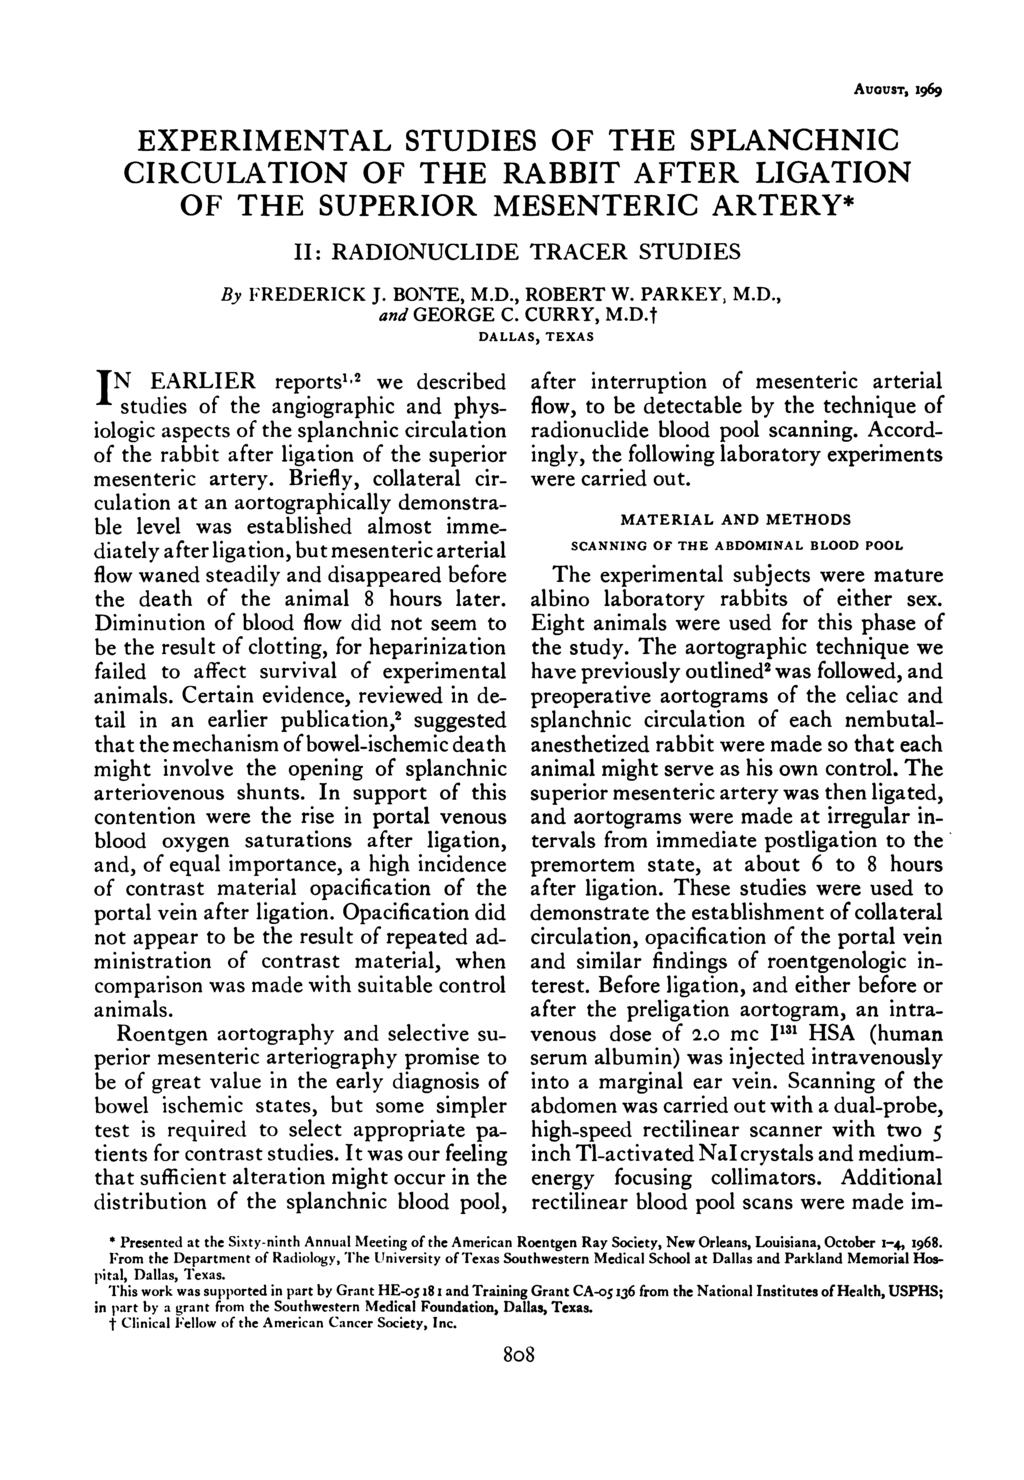 AUGUST, 1969 EXPERIMENTAL STUDIES OF THE SPLANCHNIC CIRCULATION OF THE RABBIT AFTER LIGATION OF THE SUPERIOR MESENTERIC ARTERY* II: RADIONUCLIDE TRACER STUDIES By FREDERICK J. BONTE, M.D., ROBERT W.